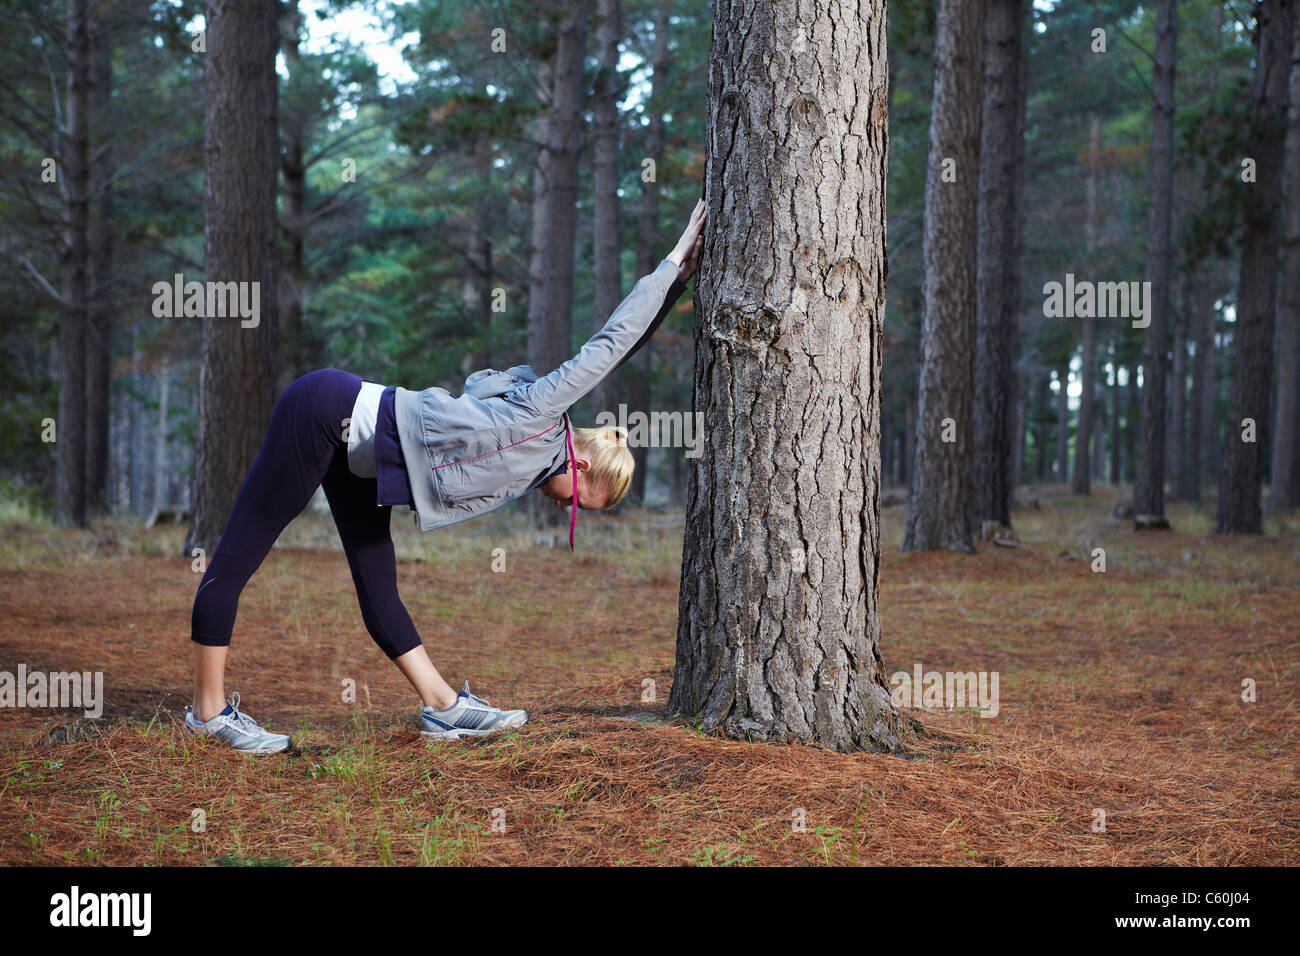 Runner stretching in forest Stock Photo